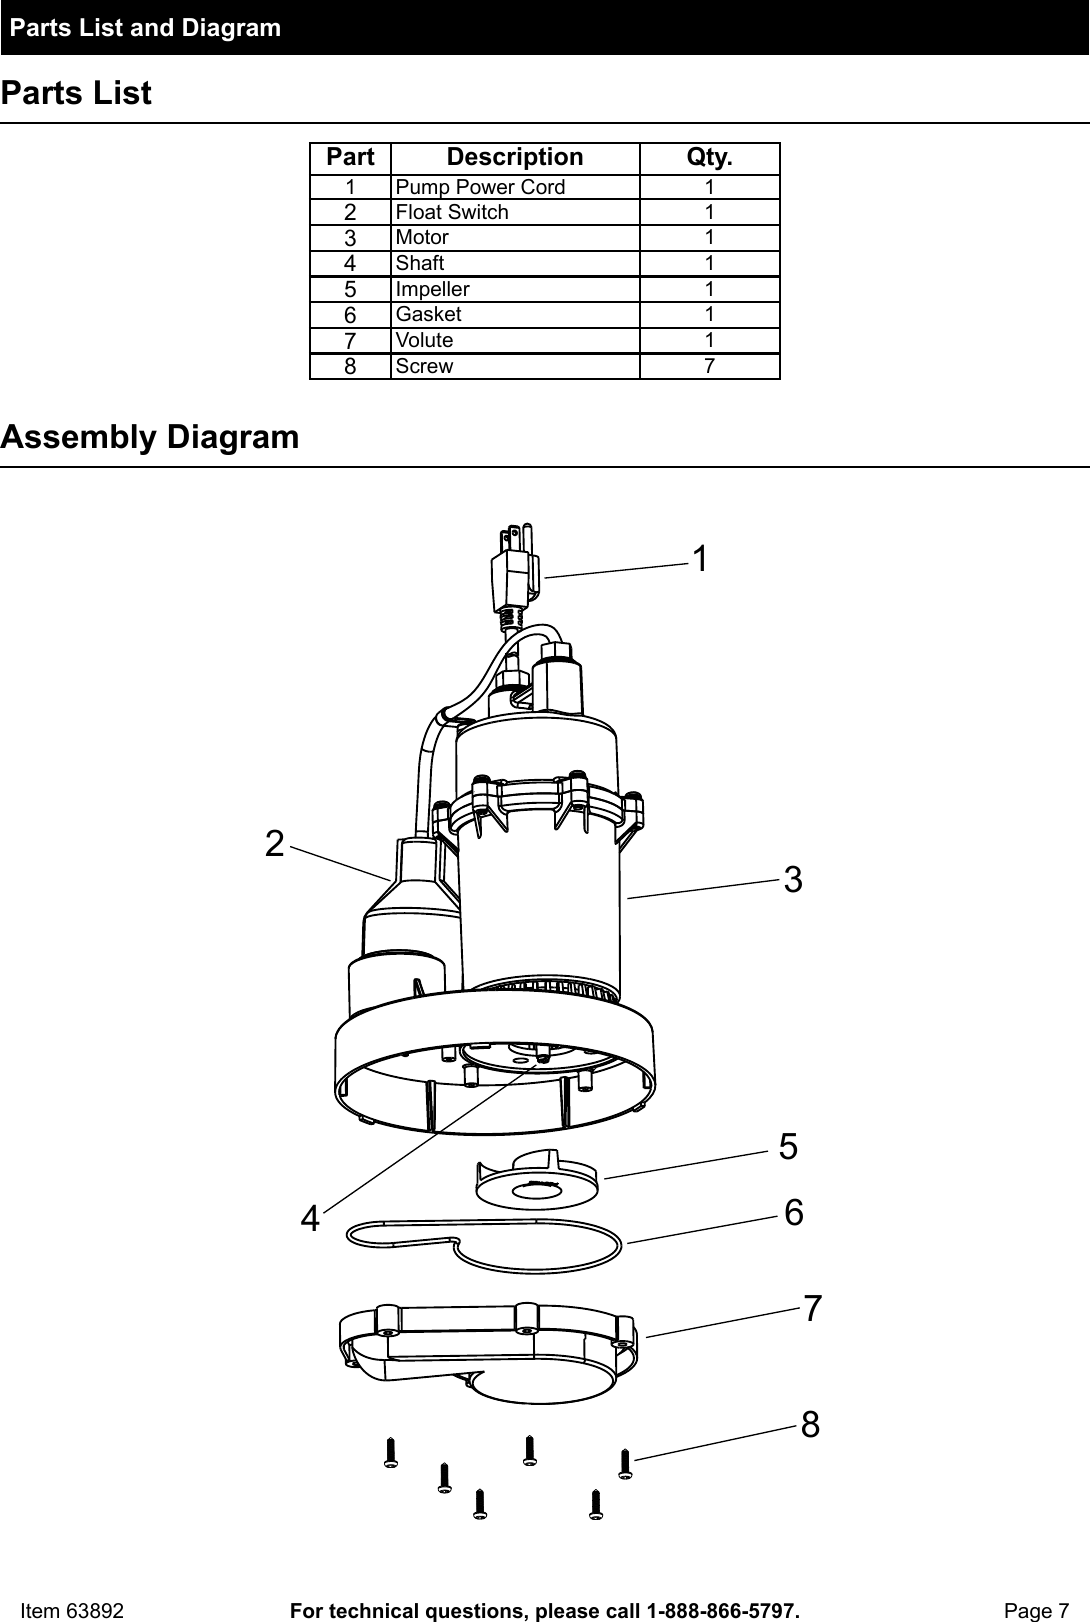 Page 7 of 8 - Manual For The 63892 1/4 HP Submersible Sump Pump 3000 GPH